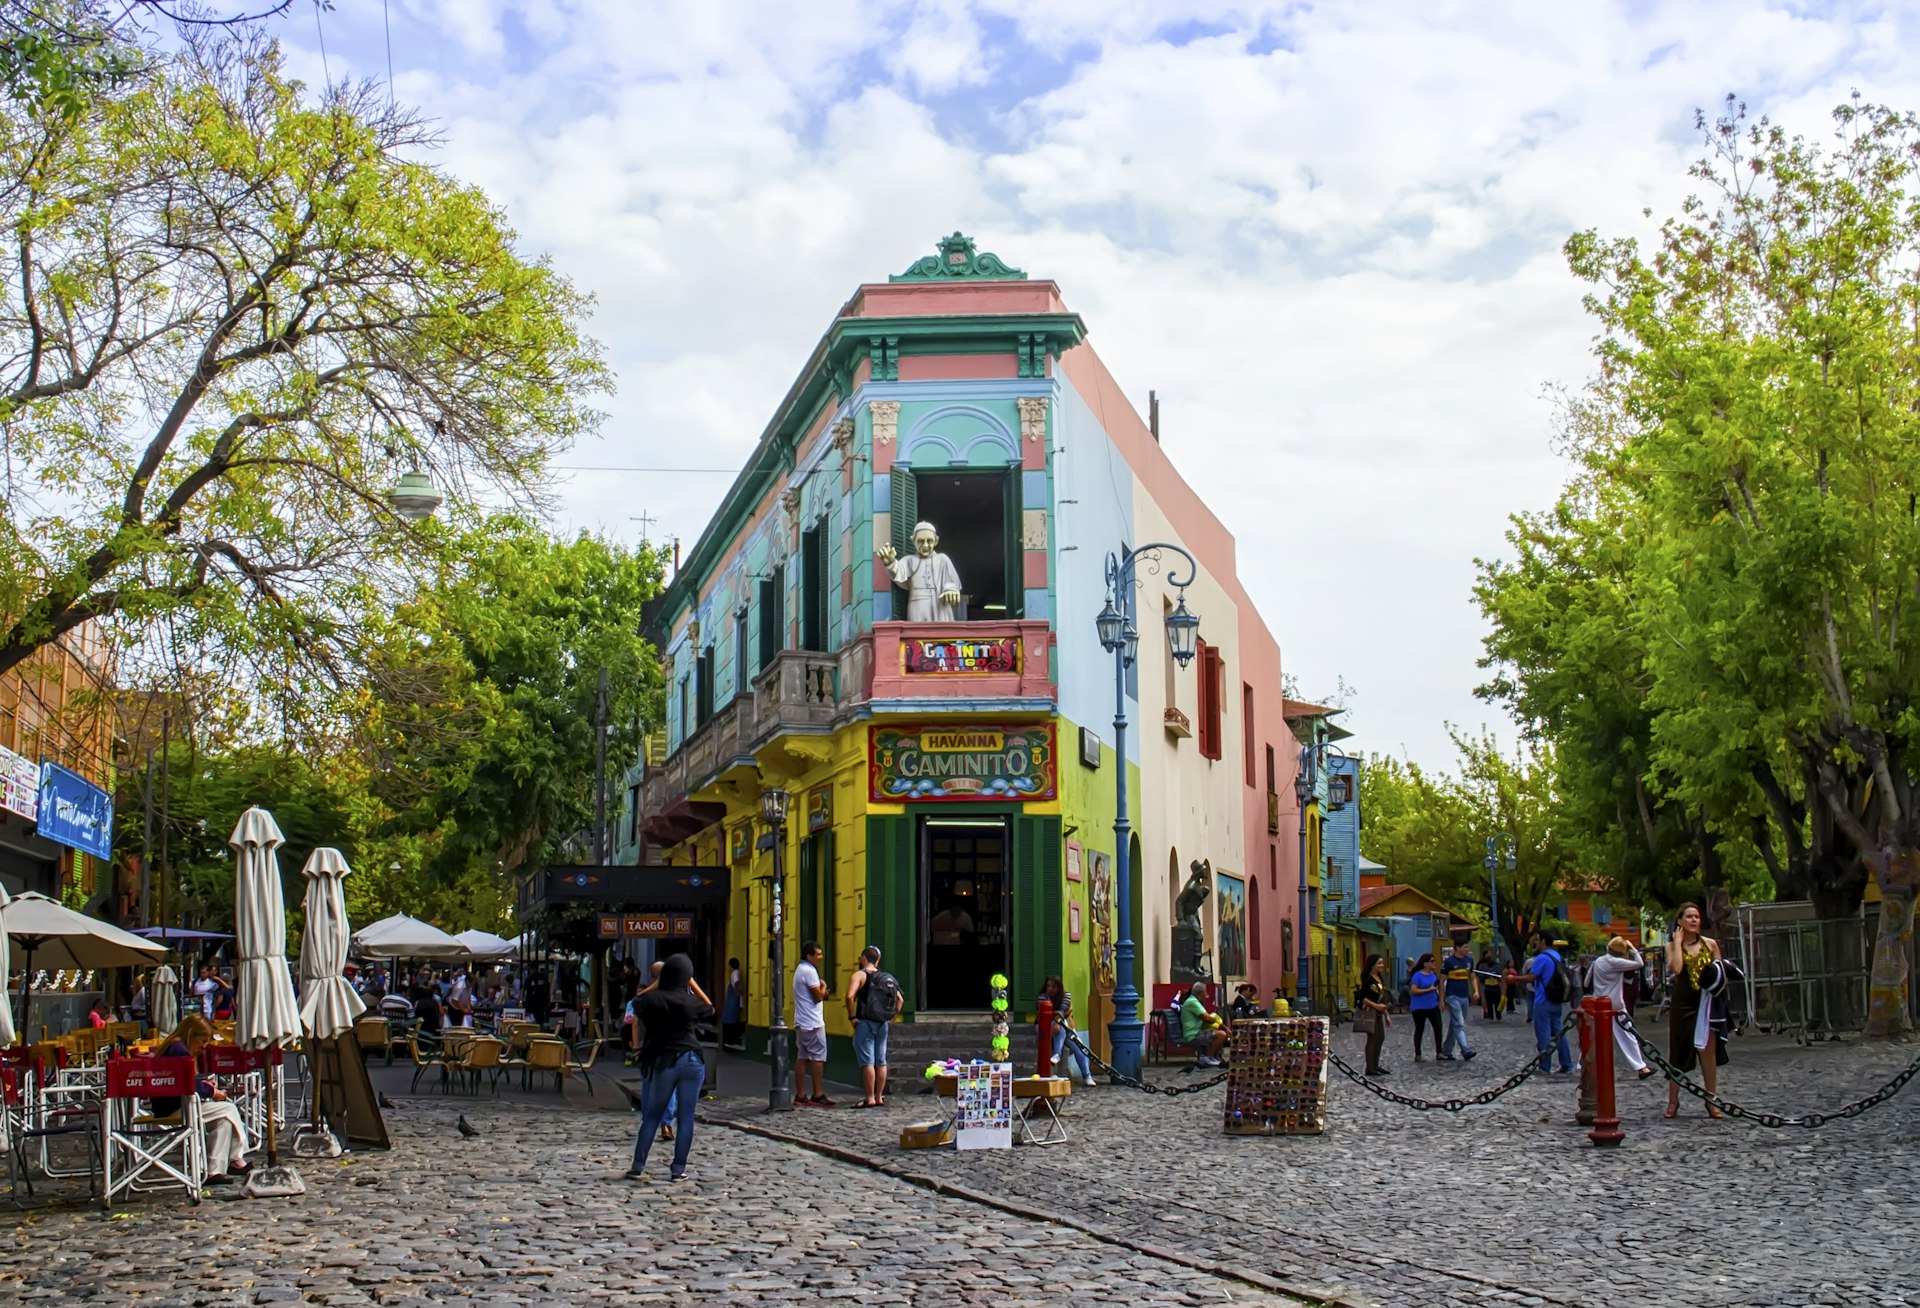 A colorful building dominates a small pedestrian cobbled street lined with stalls and cafes